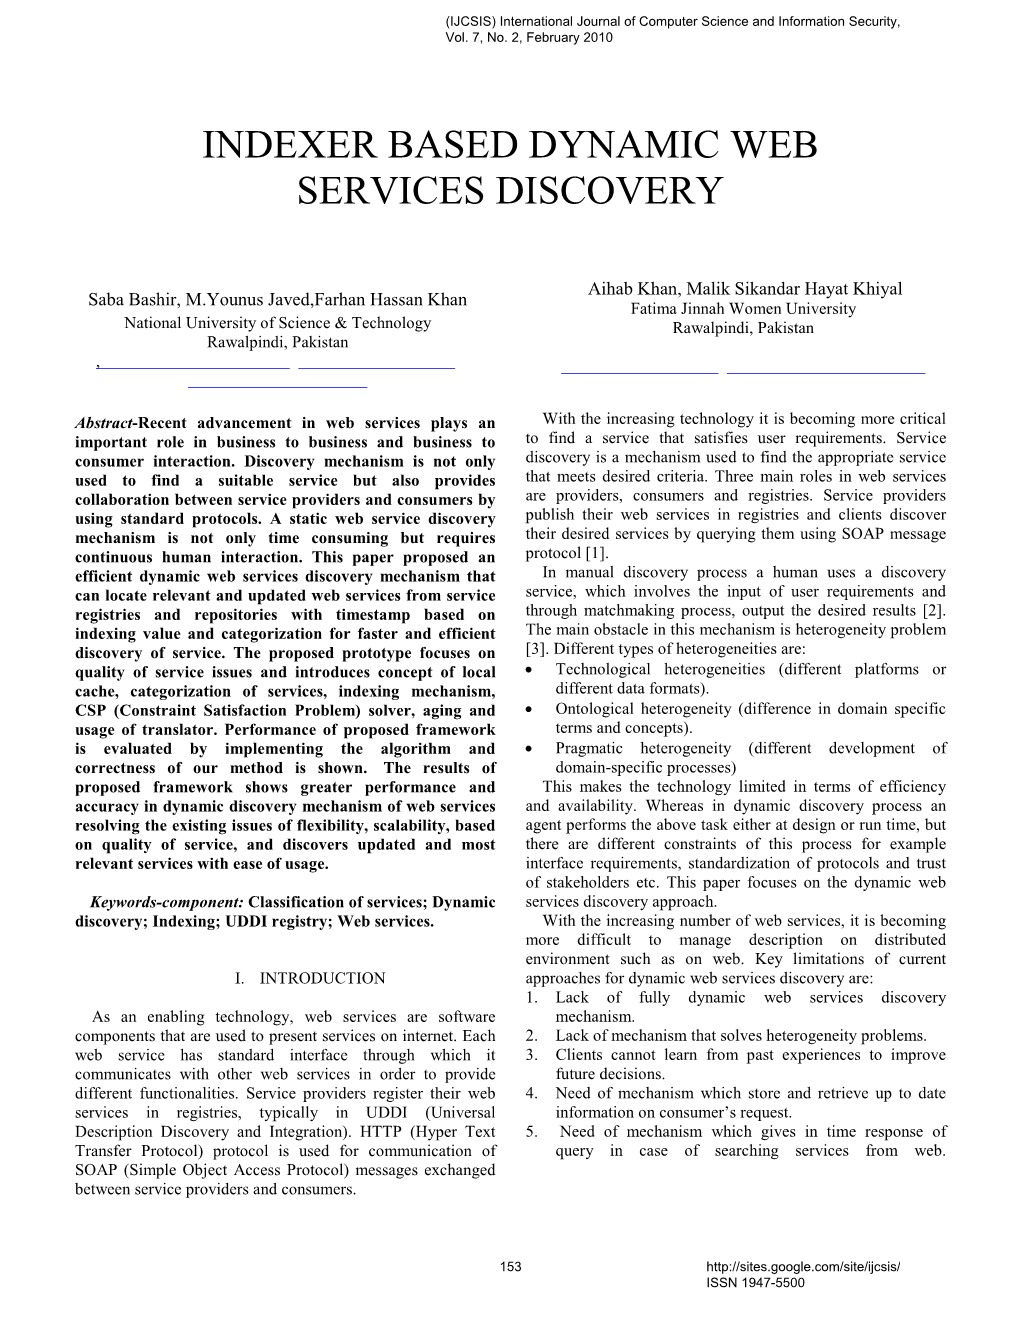 Indexer Based Dynamic Web Services Discovery